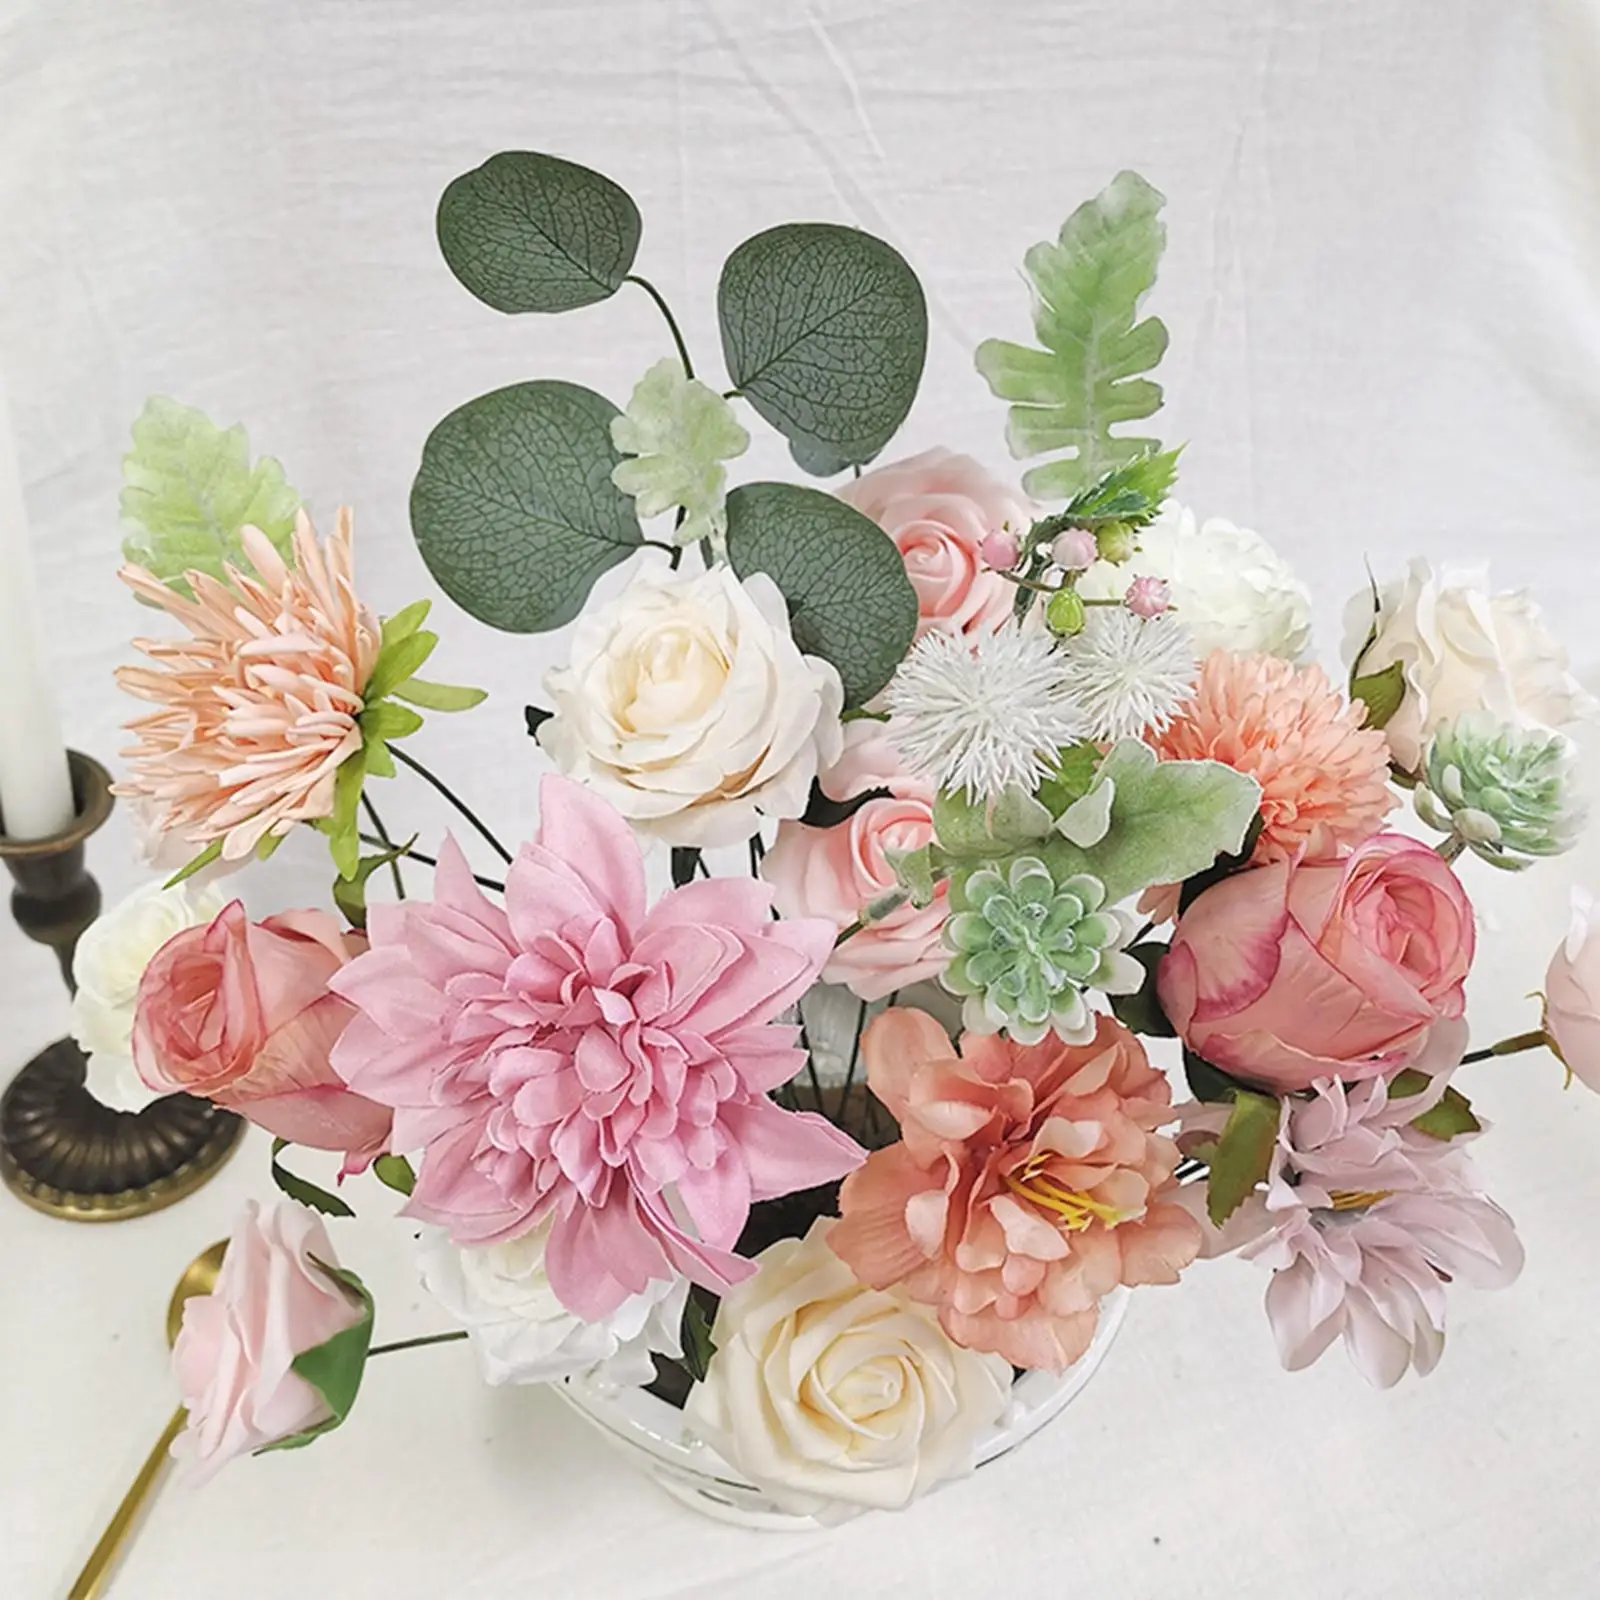 Artificial Flowers Box Valentine Day Gifts DIY Bouquets Anniversary for Table Centerpieces Wedding Girlfriends Wife Lovers